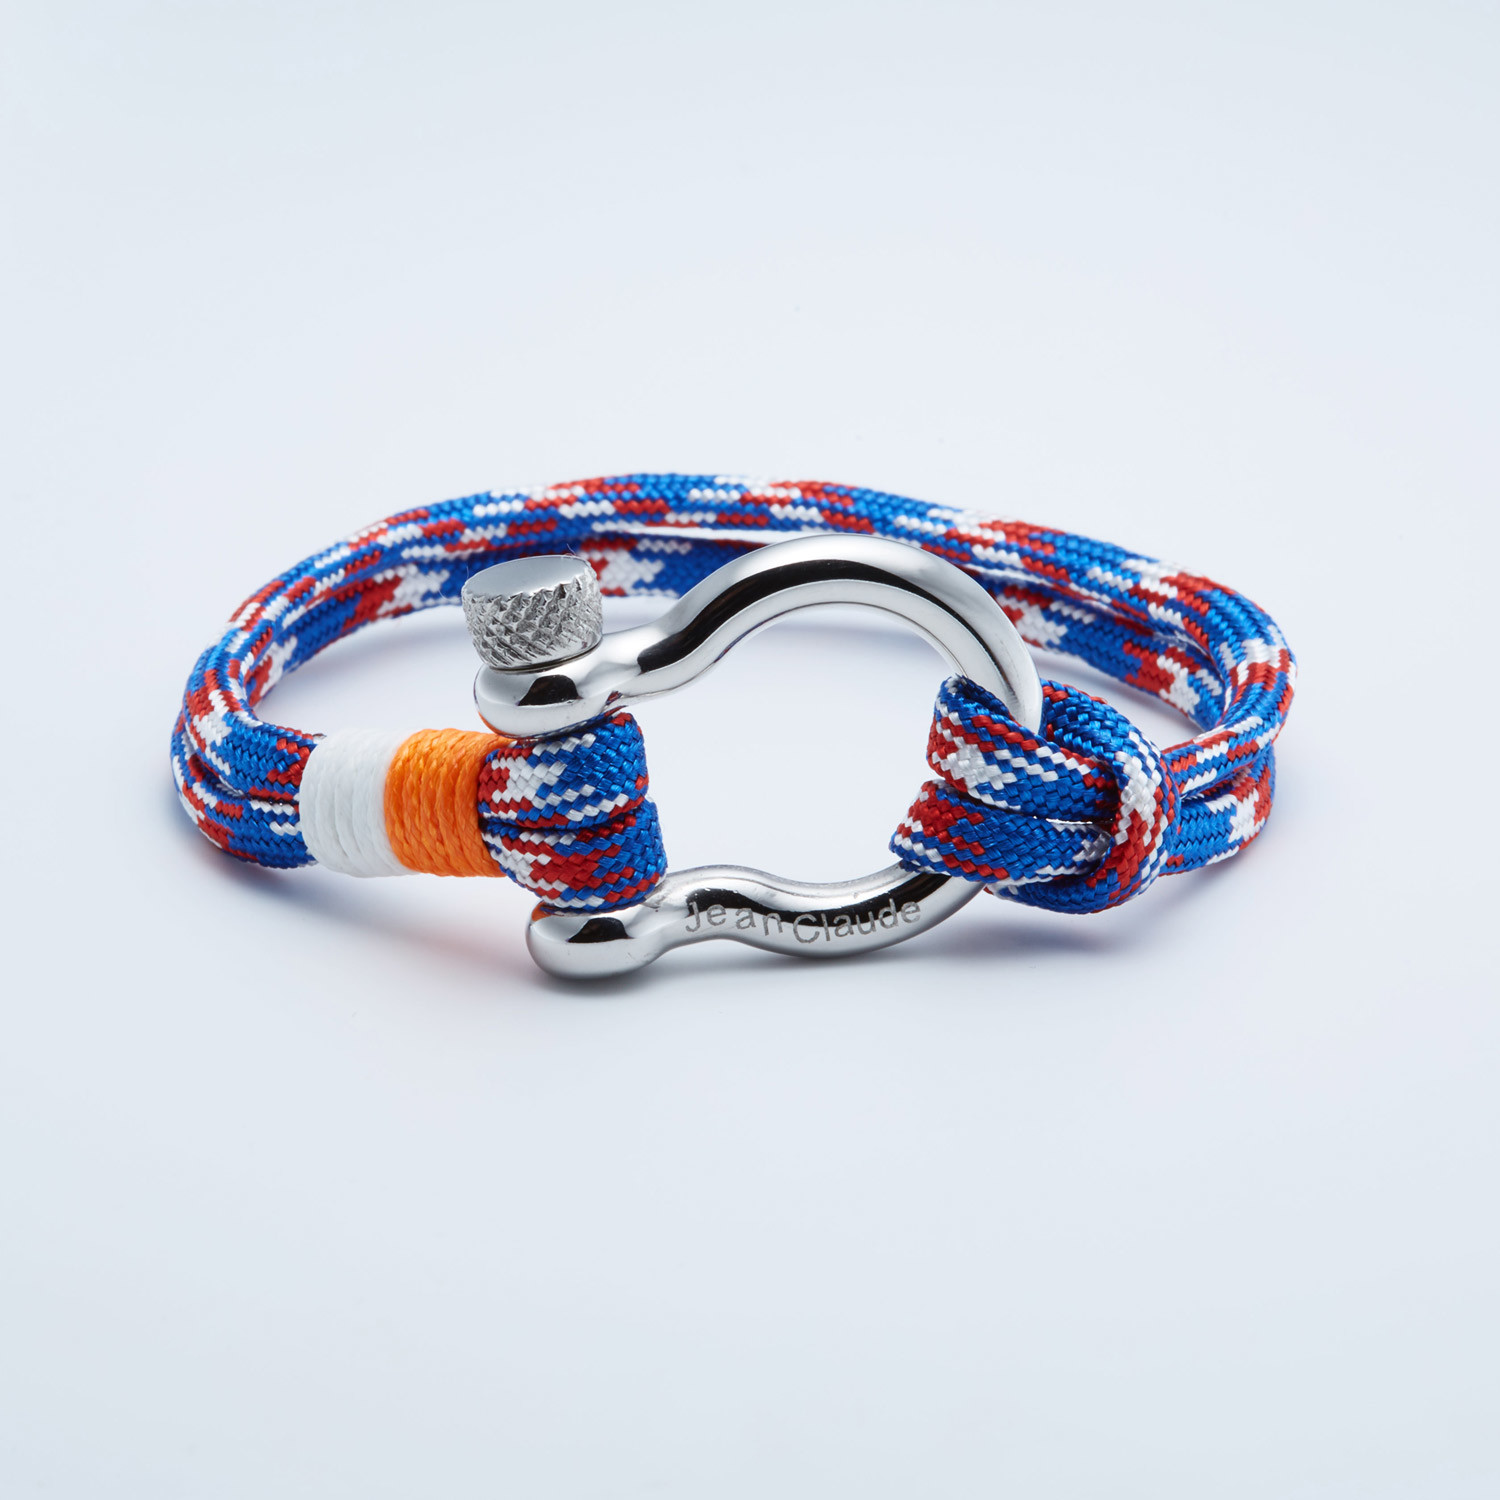 Survival Paracord Bracelet - Jean Claude Jewelry - Touch of Modern